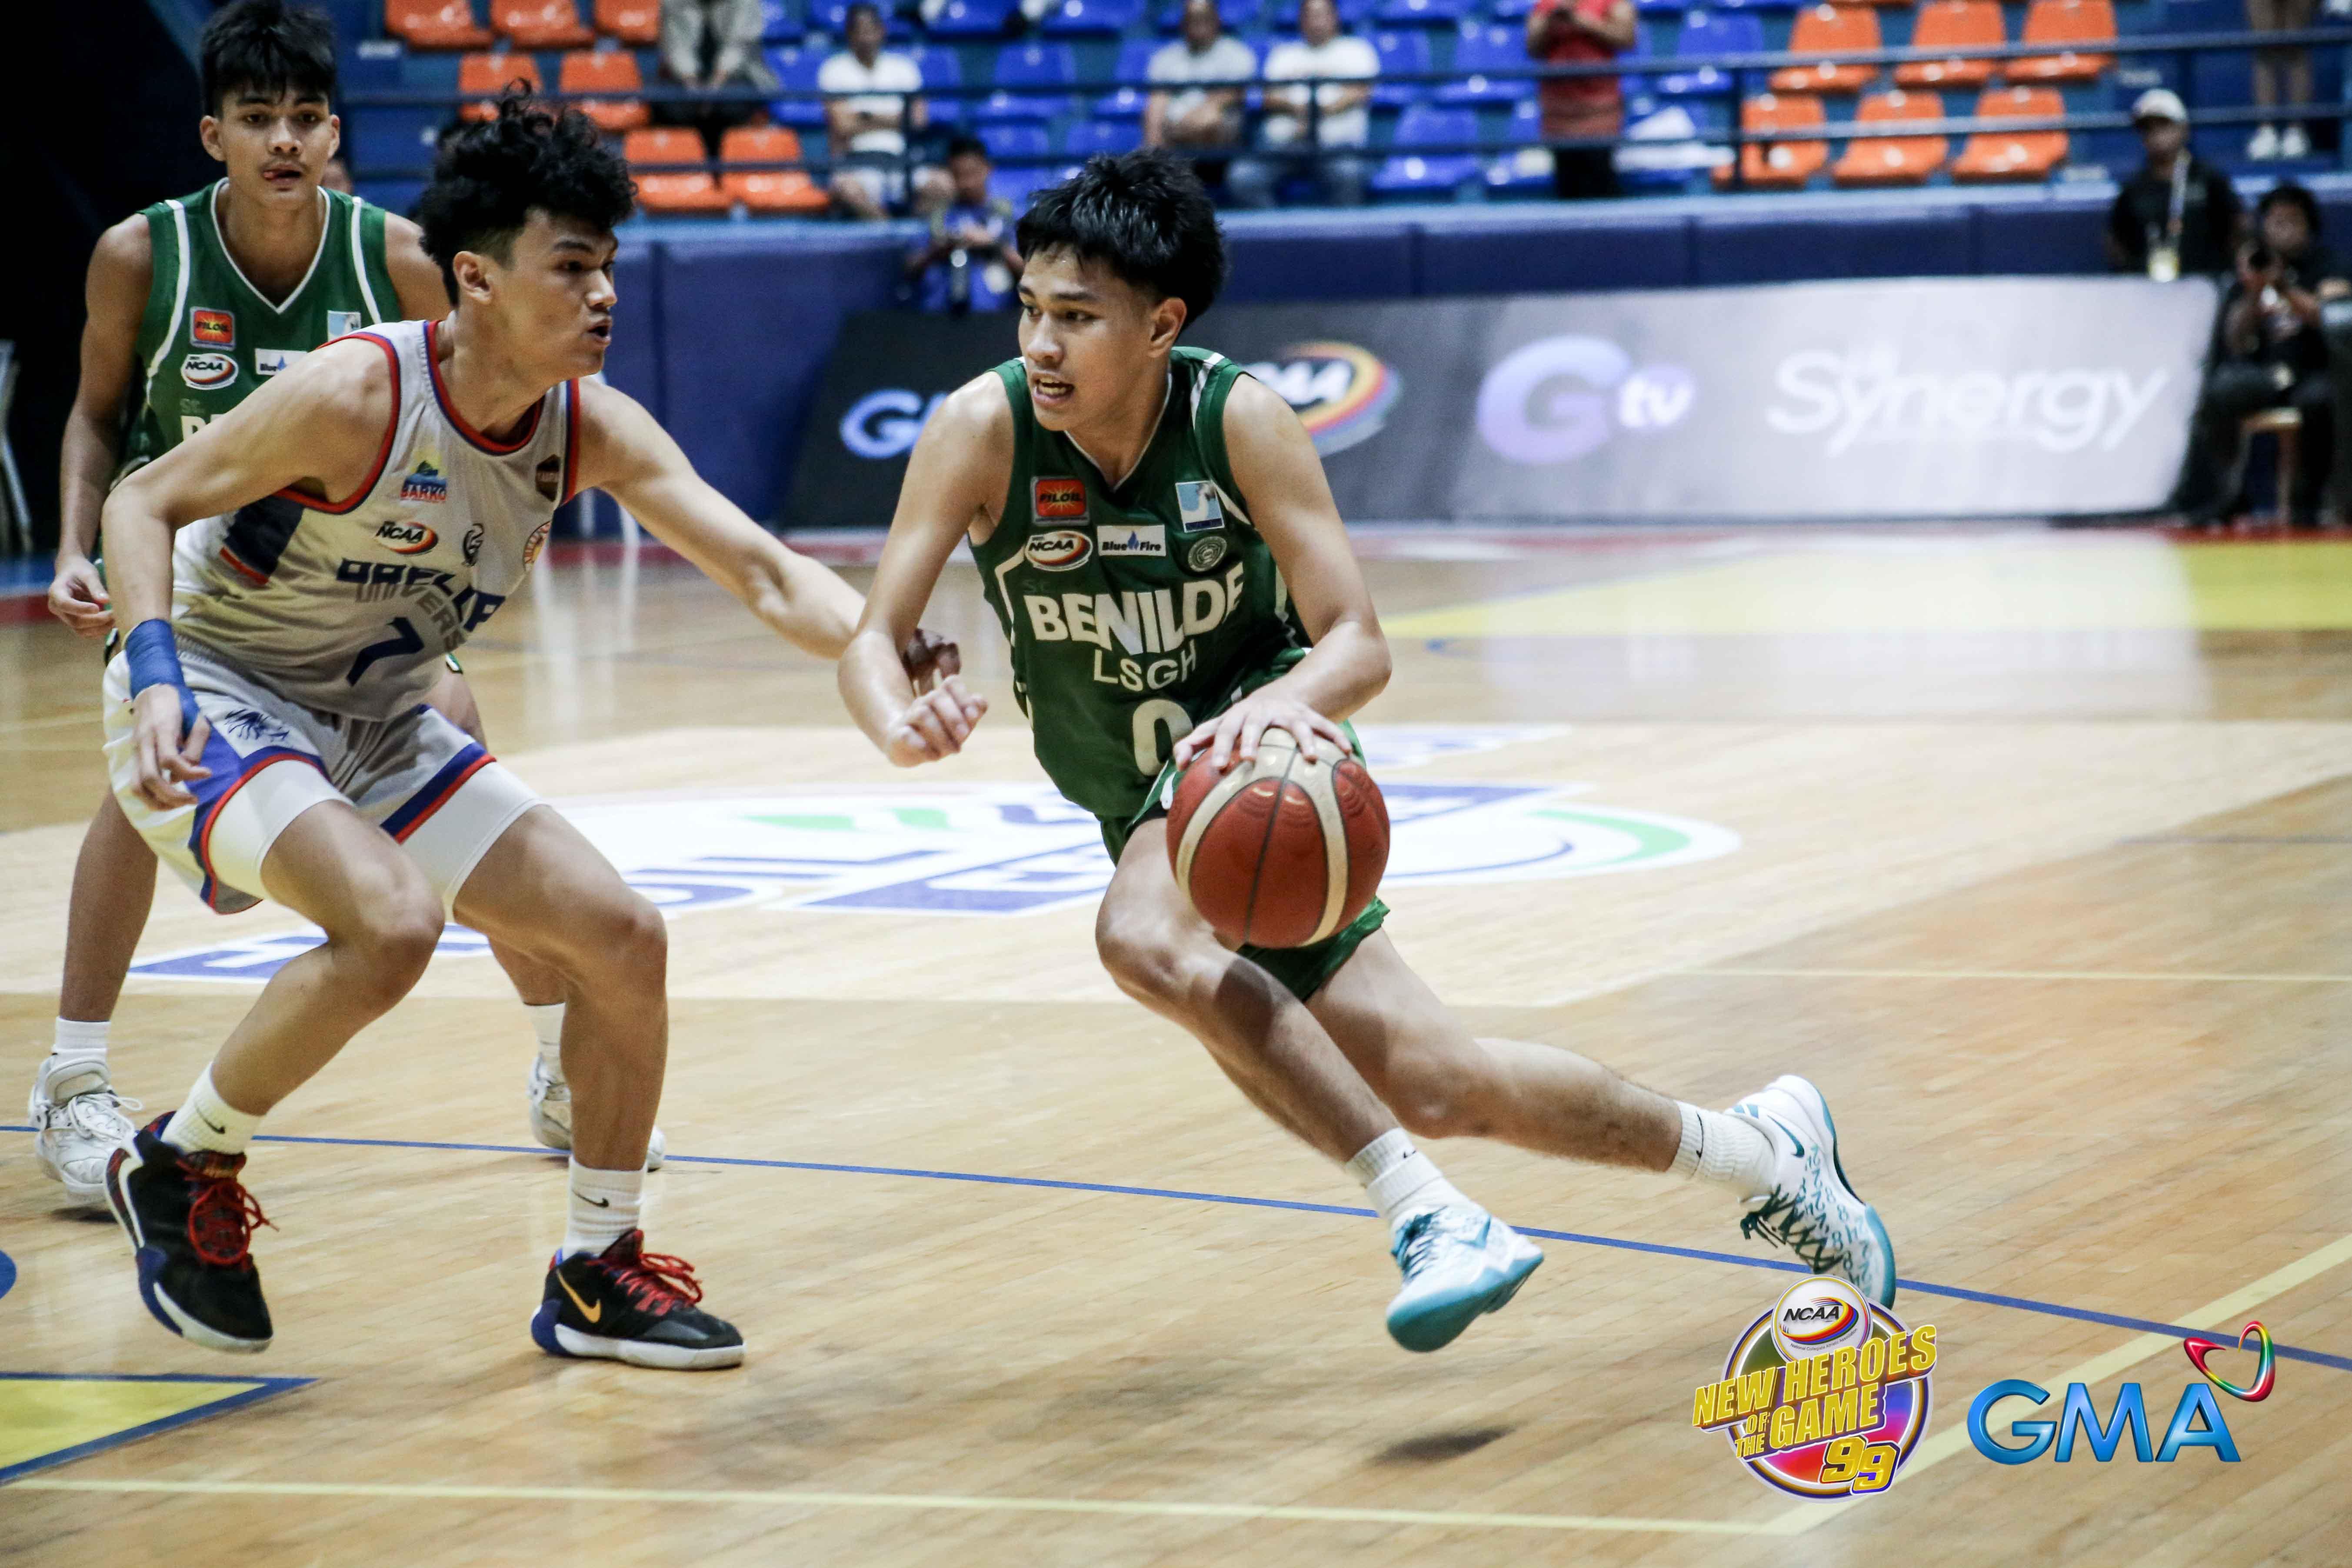 Clutch Guillian Quines tows LSGH past Arellano for first win